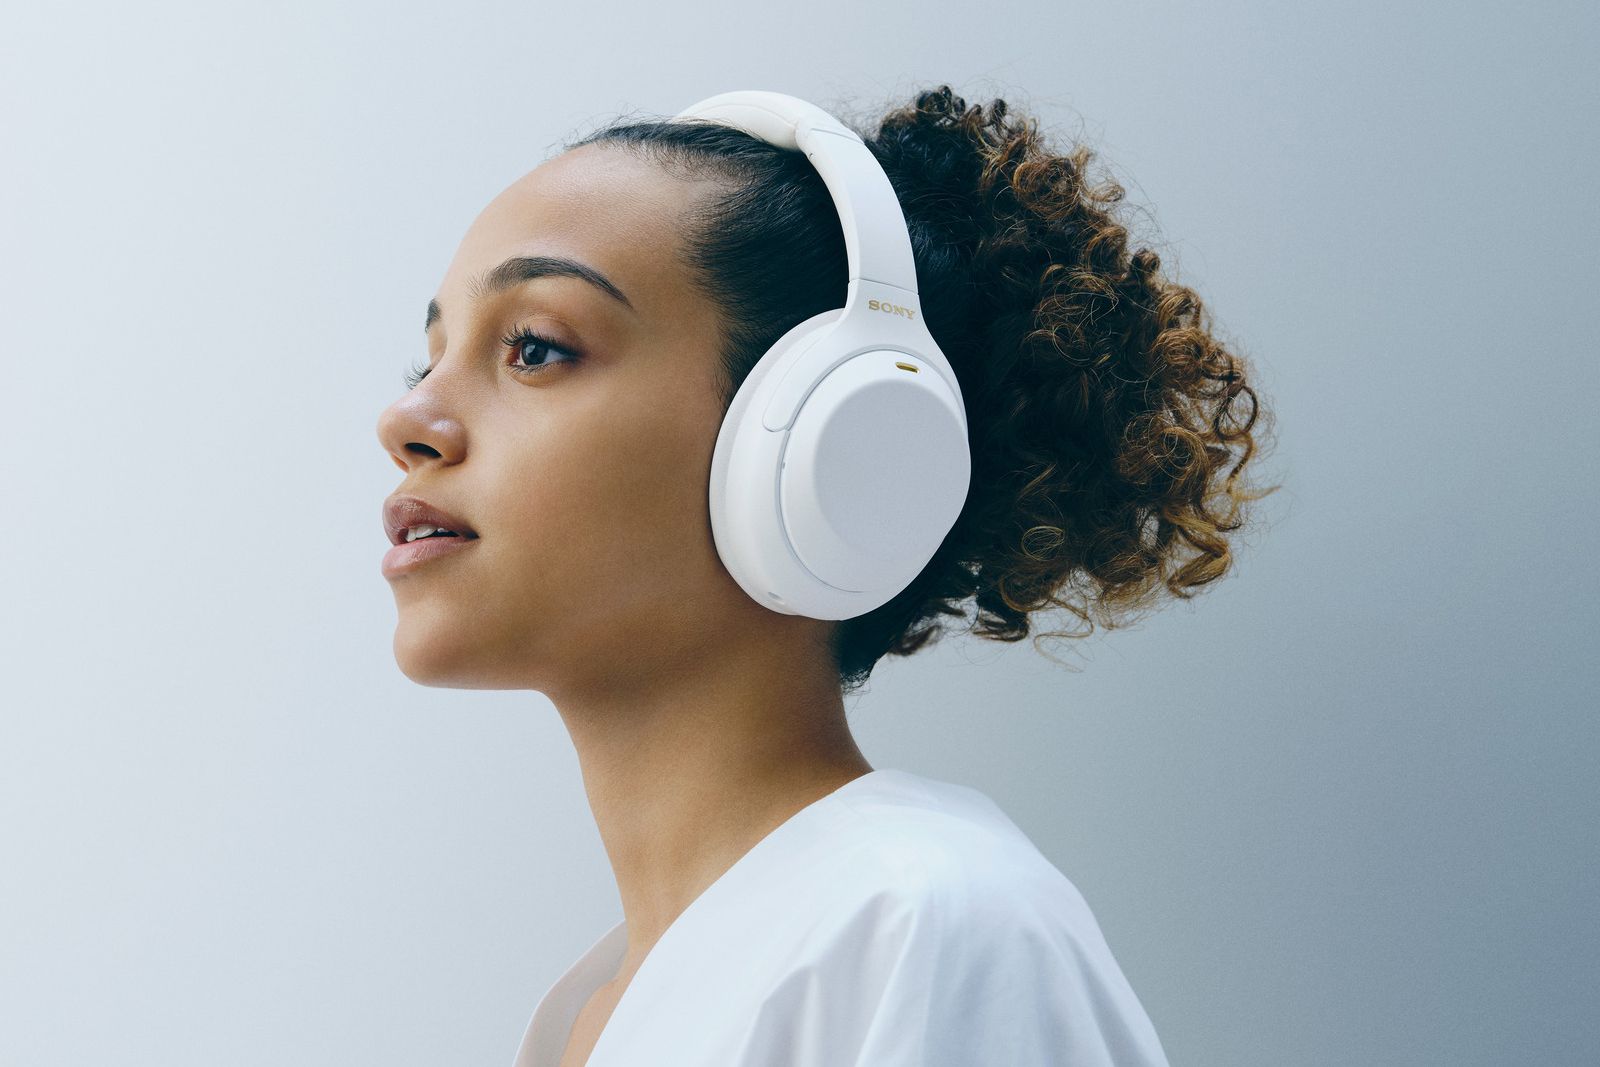 Sony debuts limited edition 'Silent White' version of its excellent WH-1000XM4 headphones photo 1